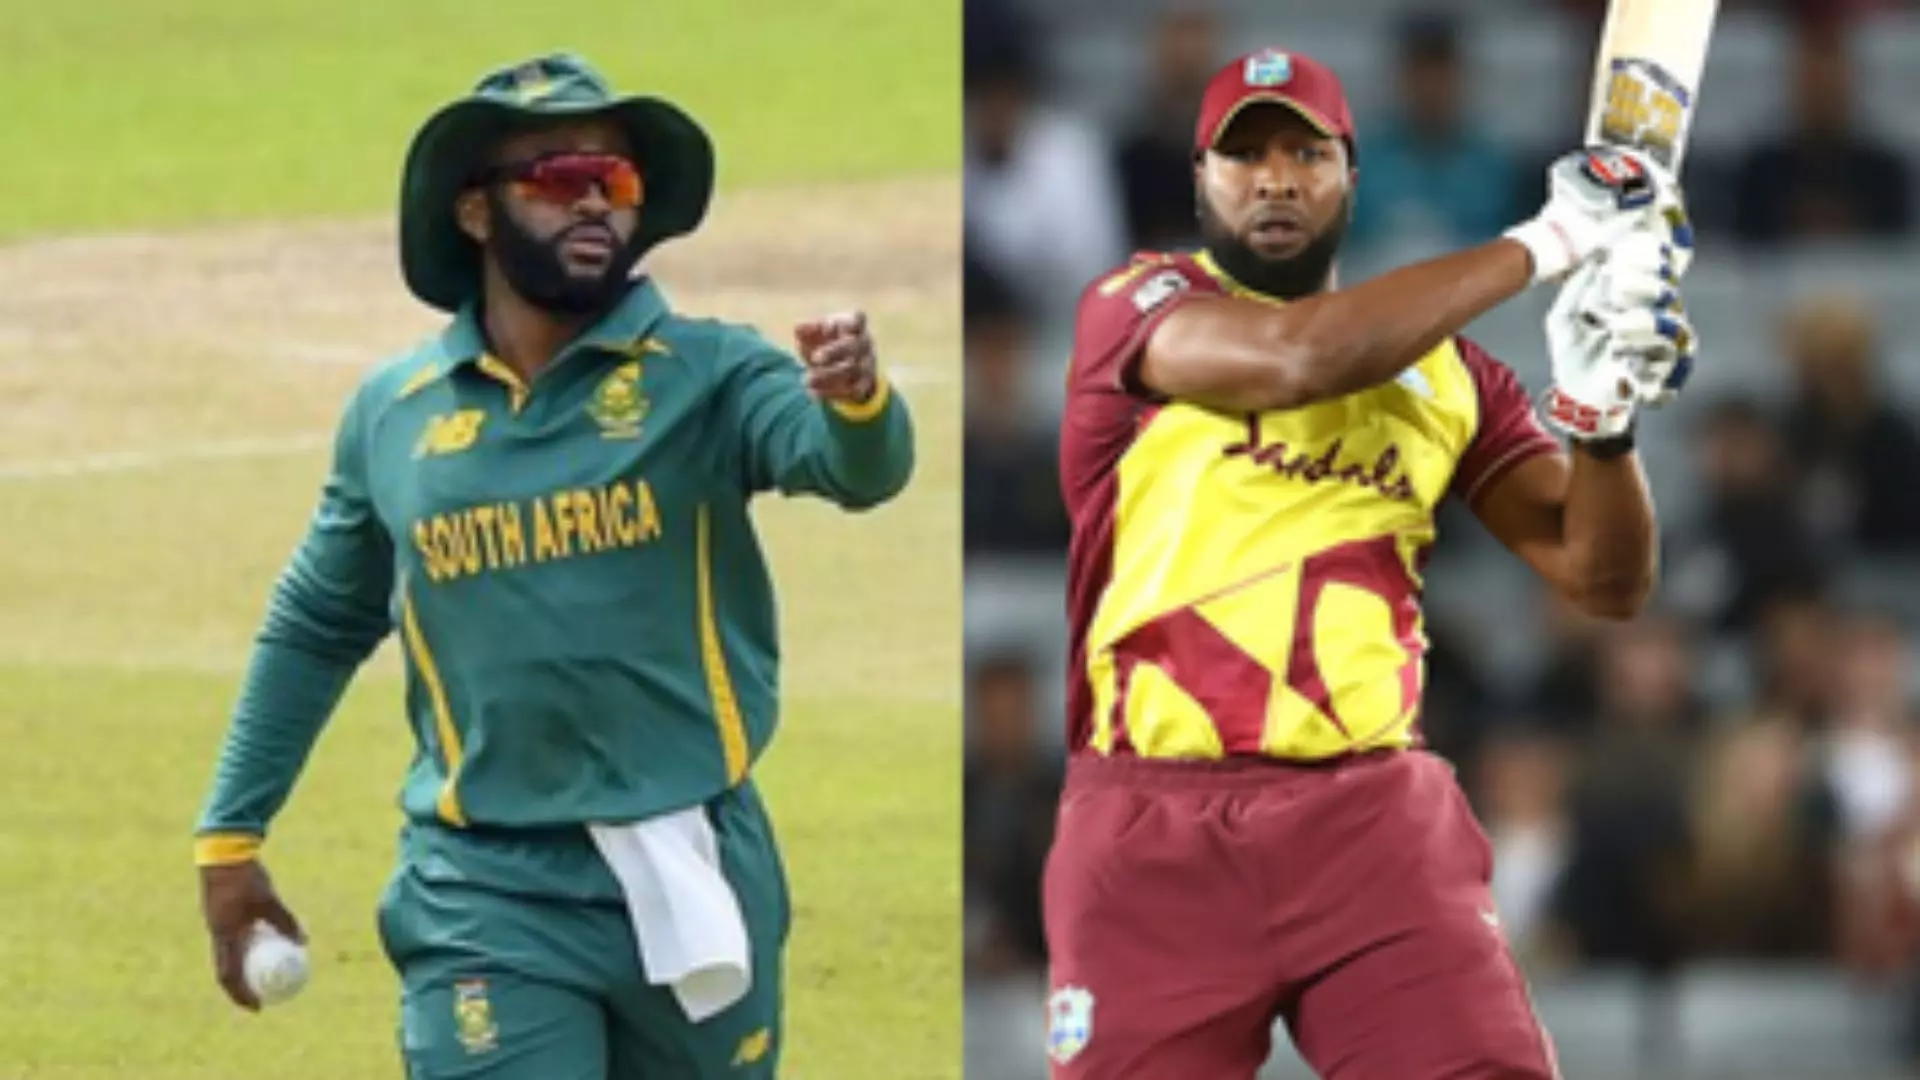 T20 World Cup 2021 West Indies vs South Africa Match In Dubai Cricket Stadium Today 26 10 2021